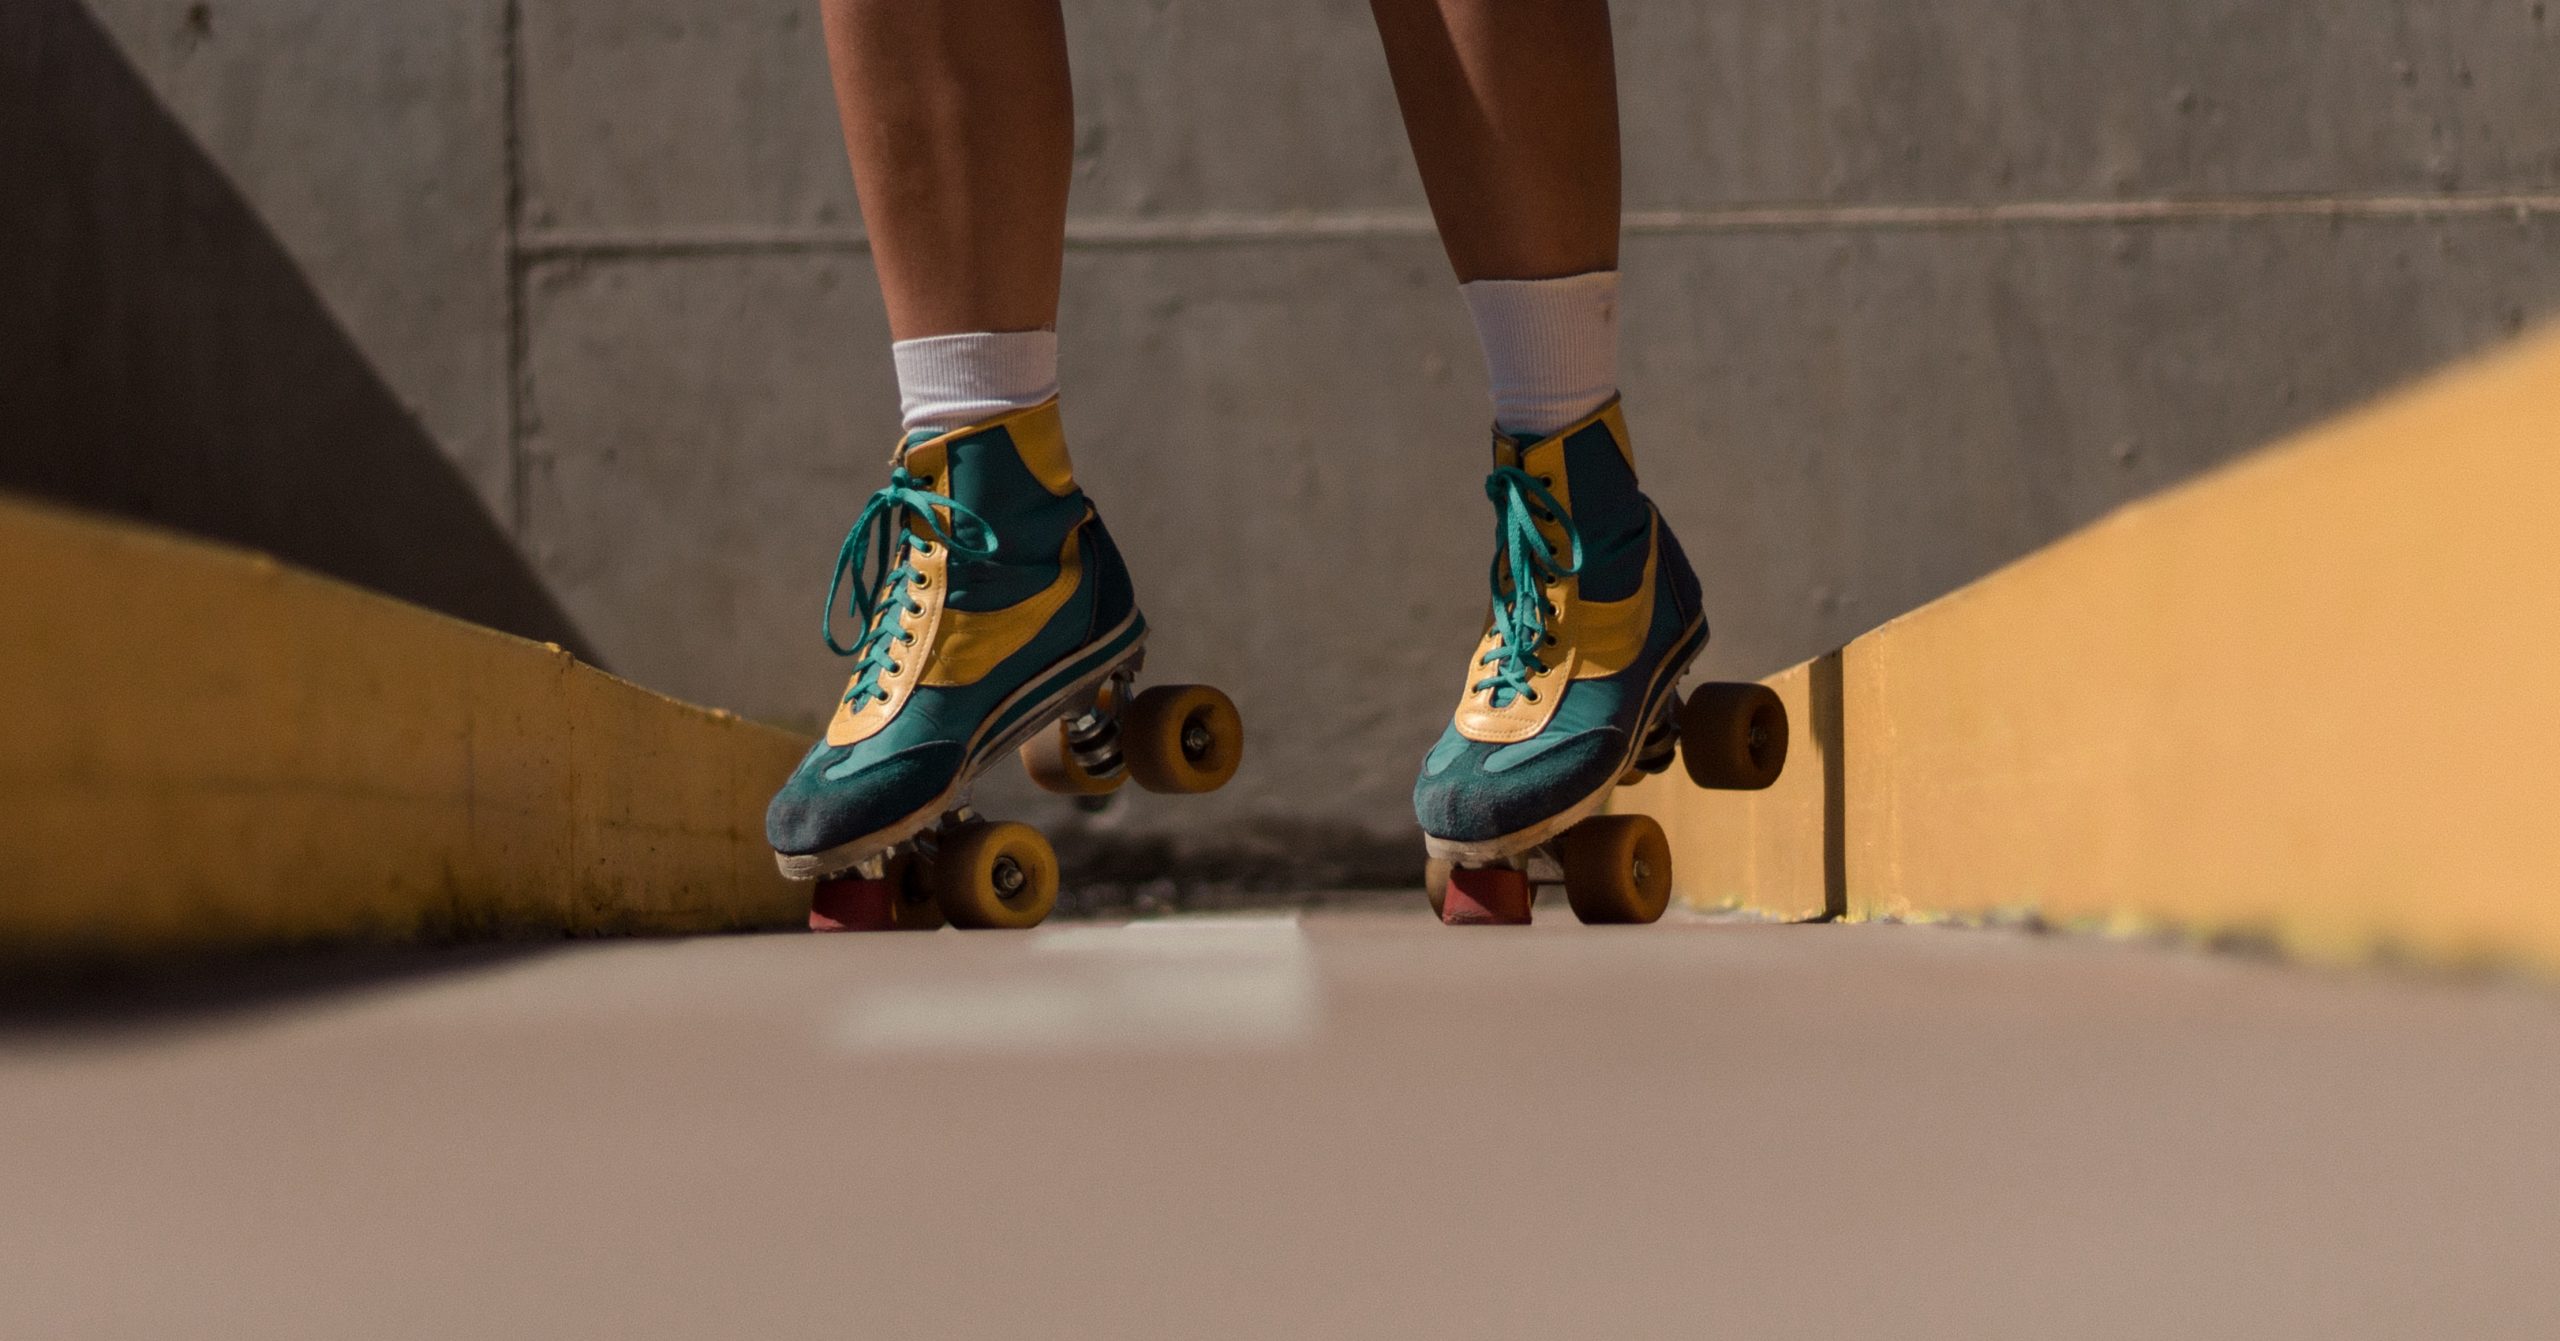 Roller Skating vs. Rollerblading: Which Is Right For You?